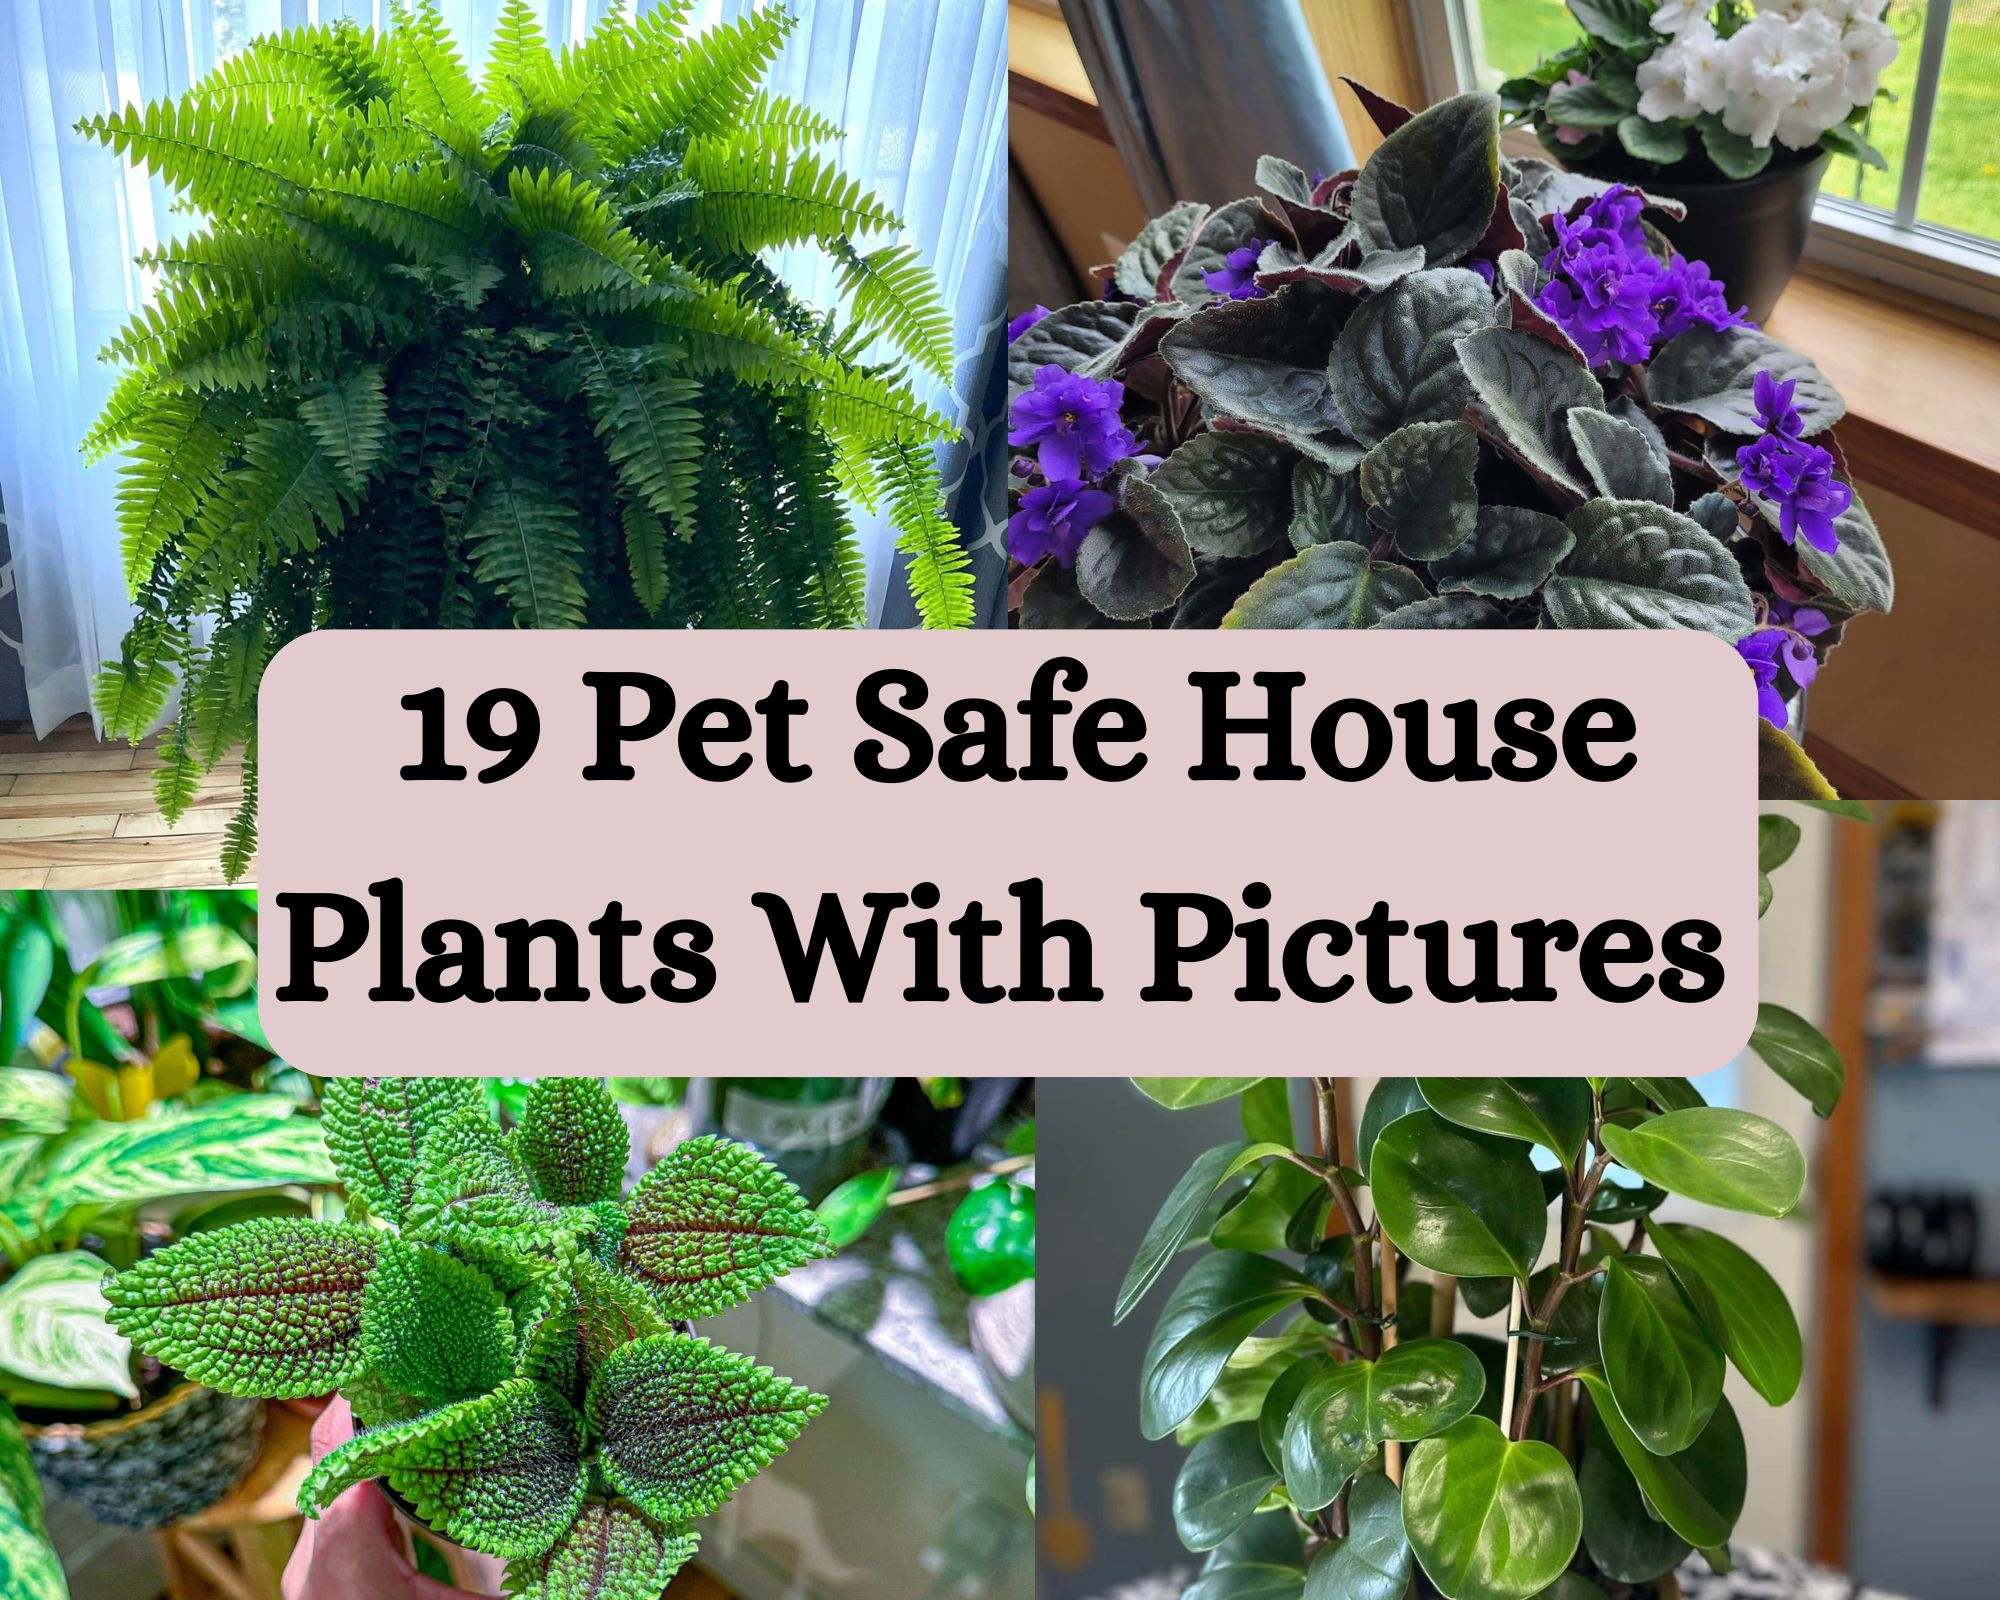 Pet Safe House Plants With Pictures